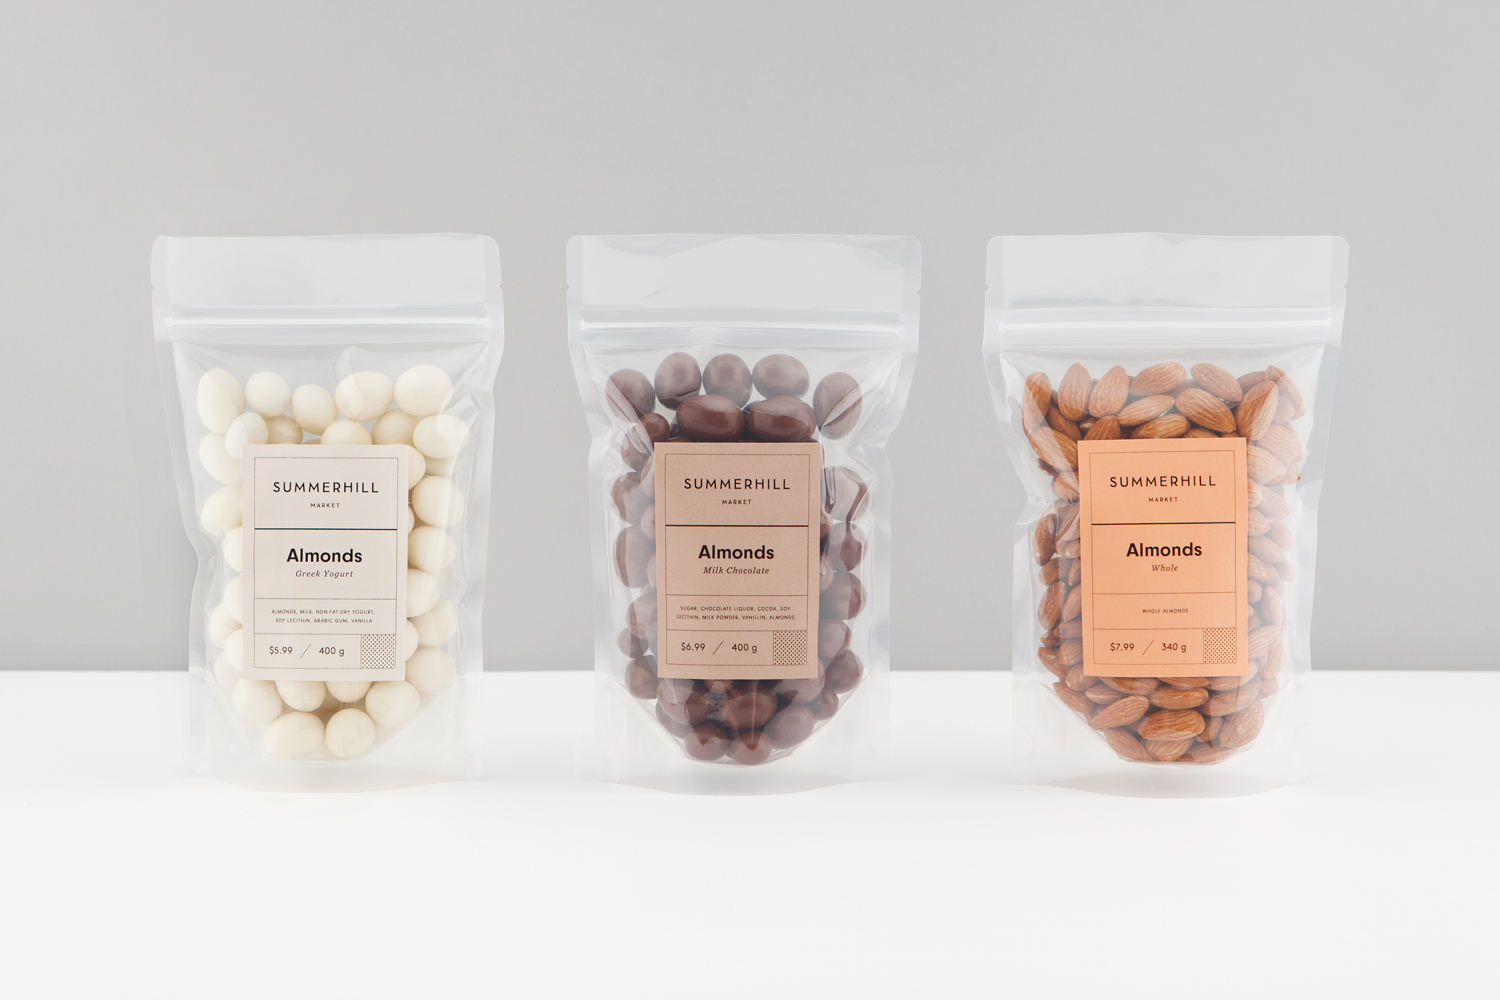 Branding and almond packaging designed by Canadian studio Blok for Toronto based boutique grocery store Summerhill Market